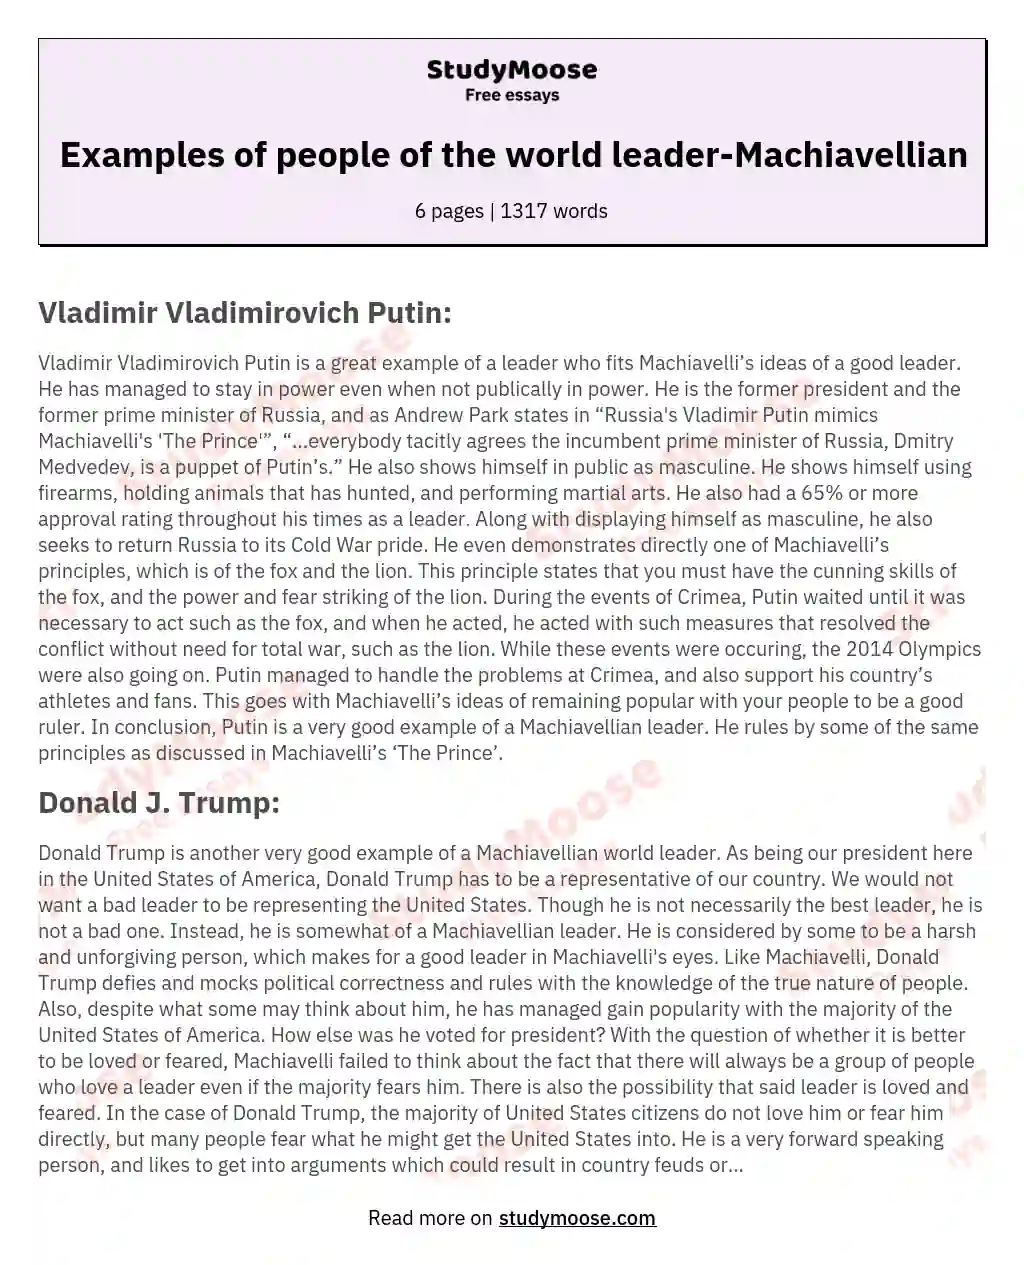 Examples of people of the world leader-Machiavellian